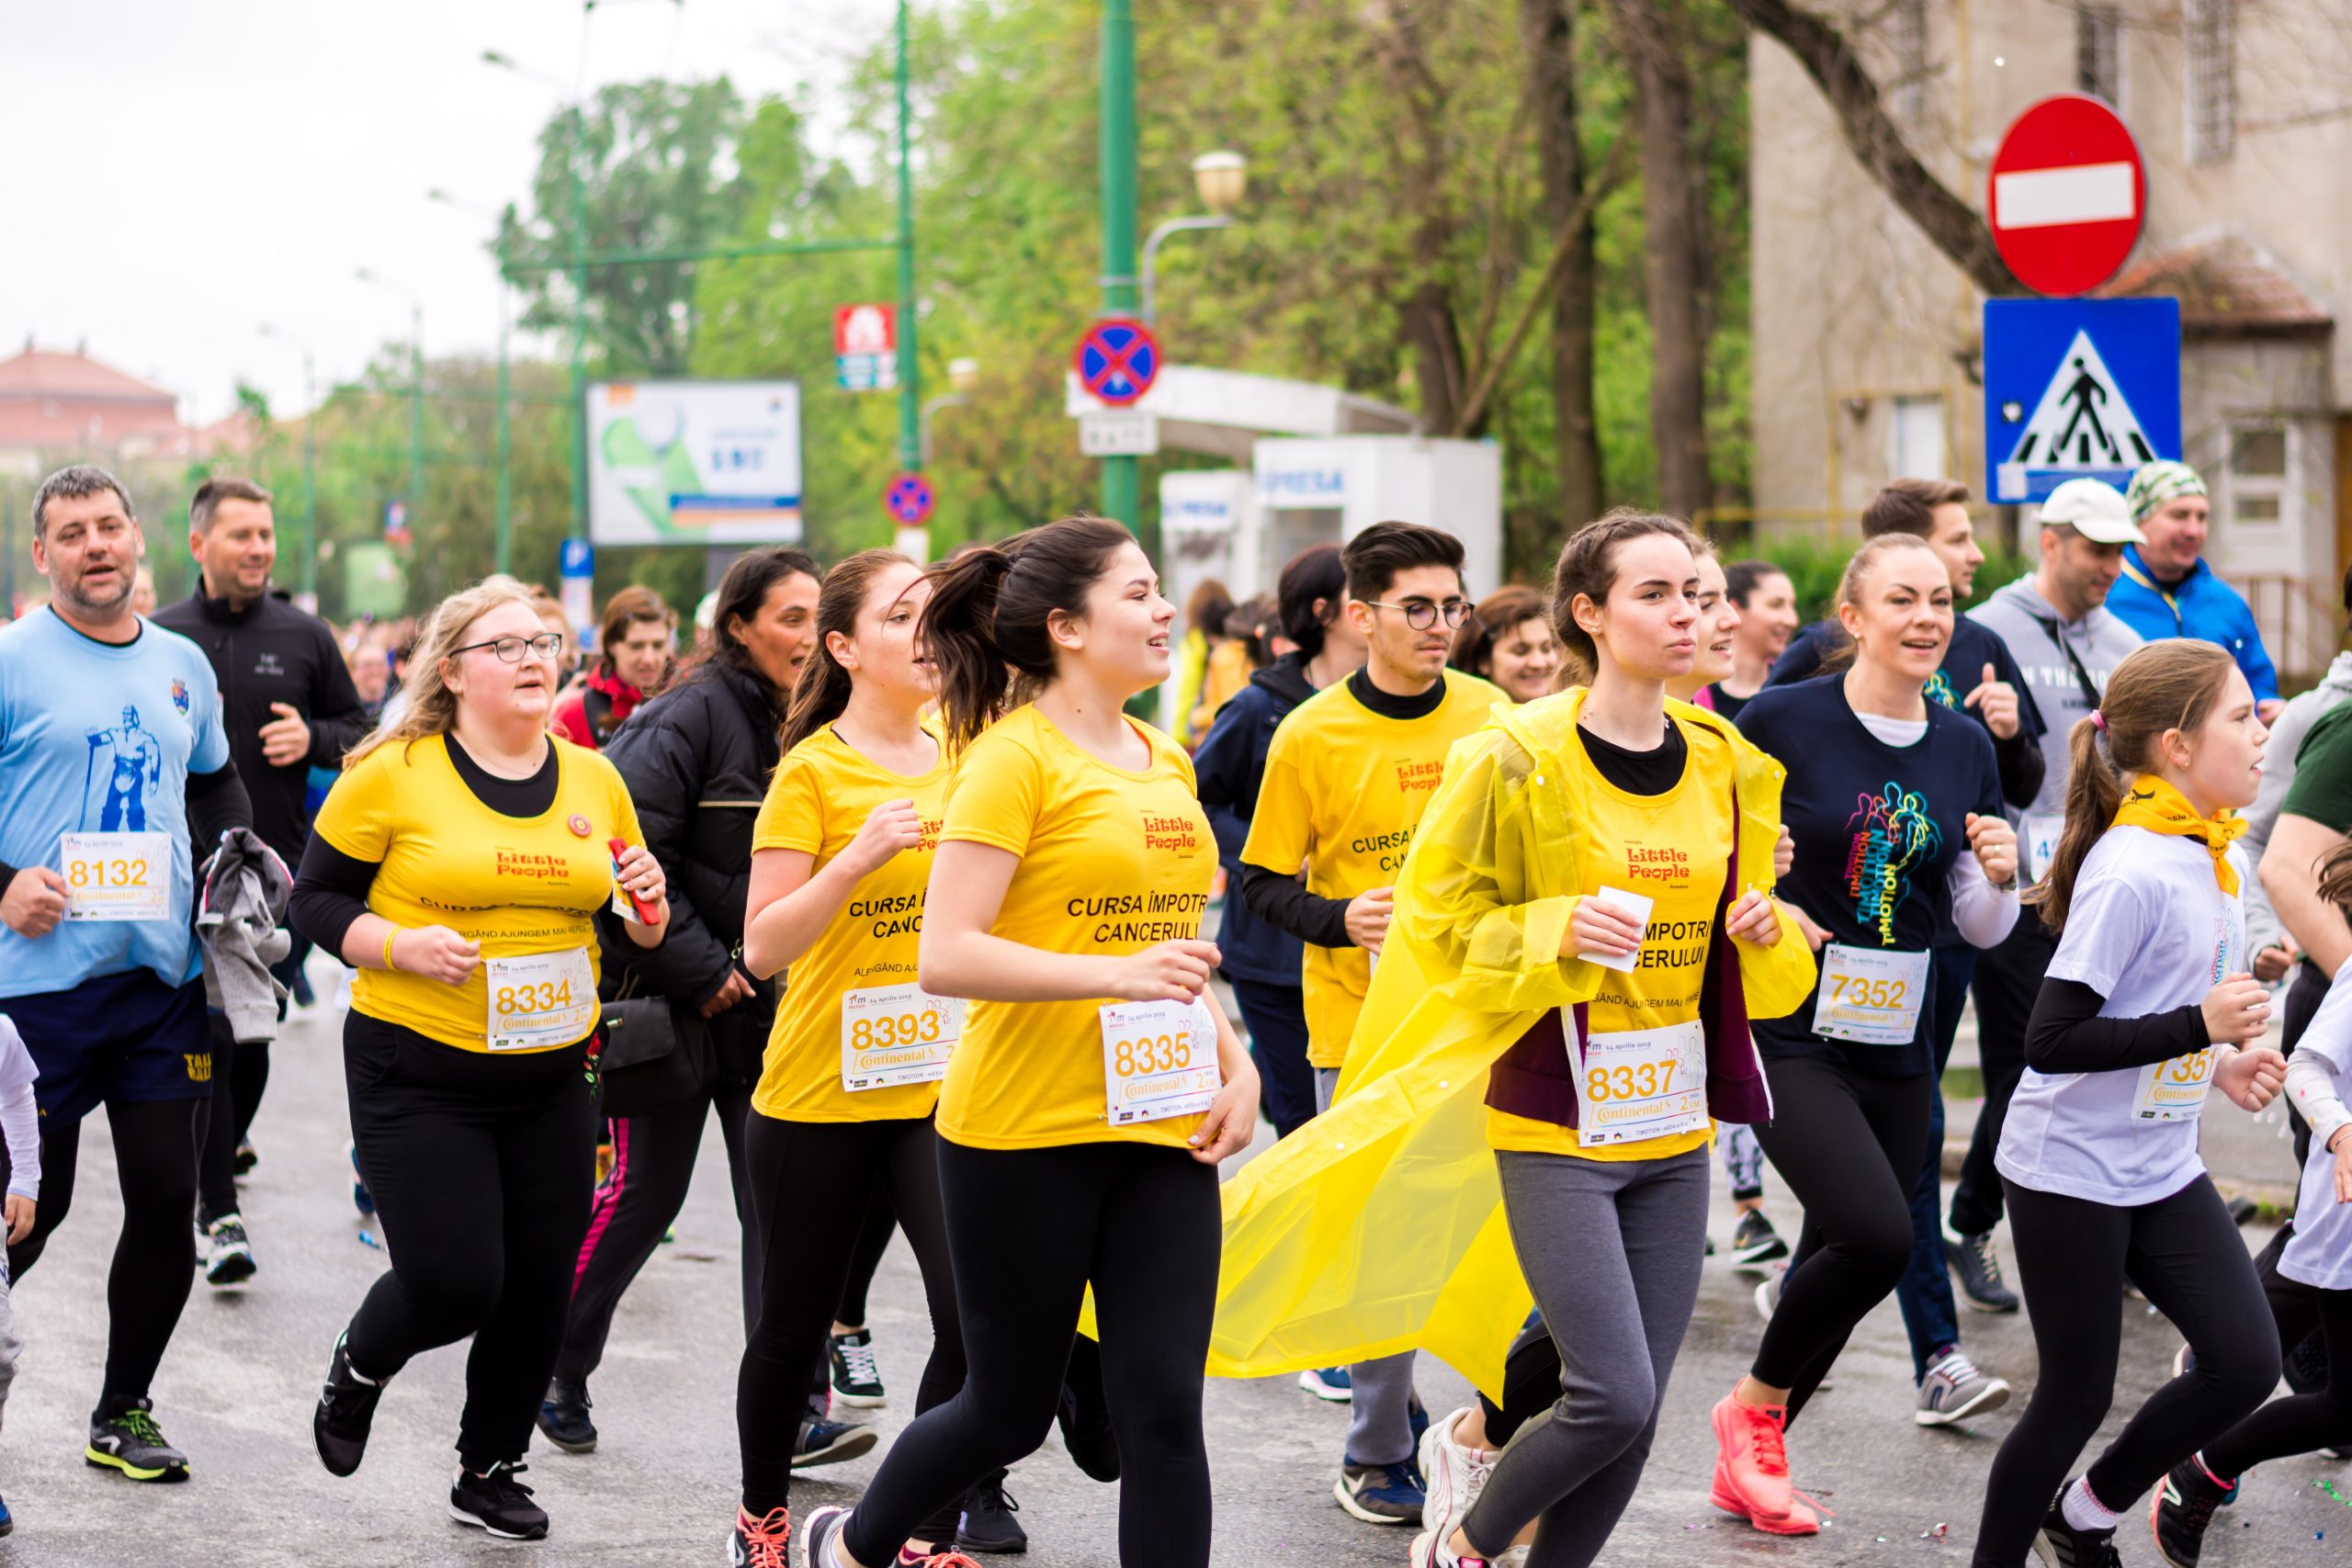 charity fundraising runners in yellow tops